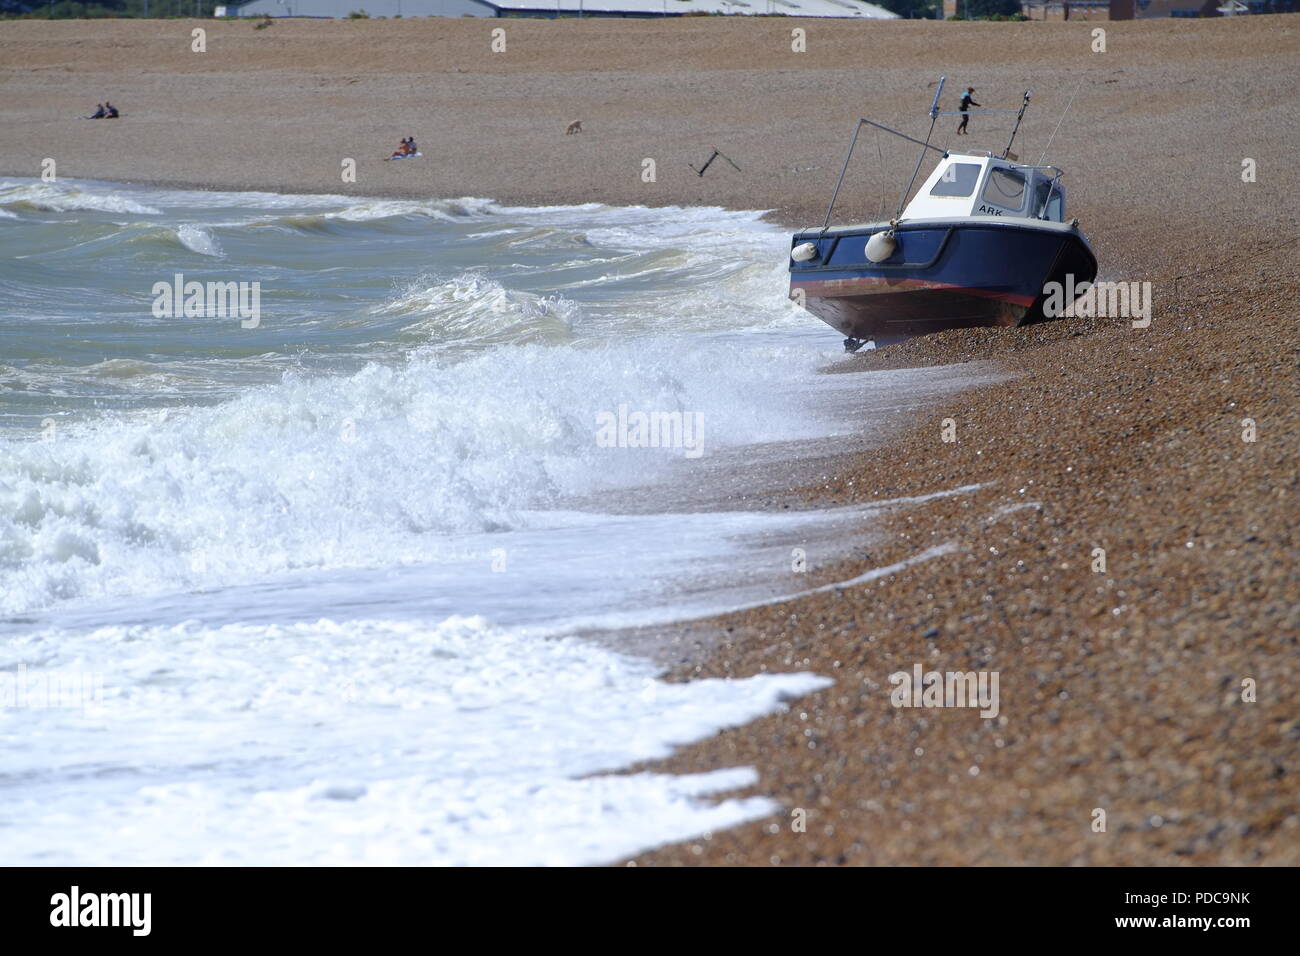 Seaford, East Sussex, UK. fishing boat washes up on Seaford beach after strong winds. Stock Photo